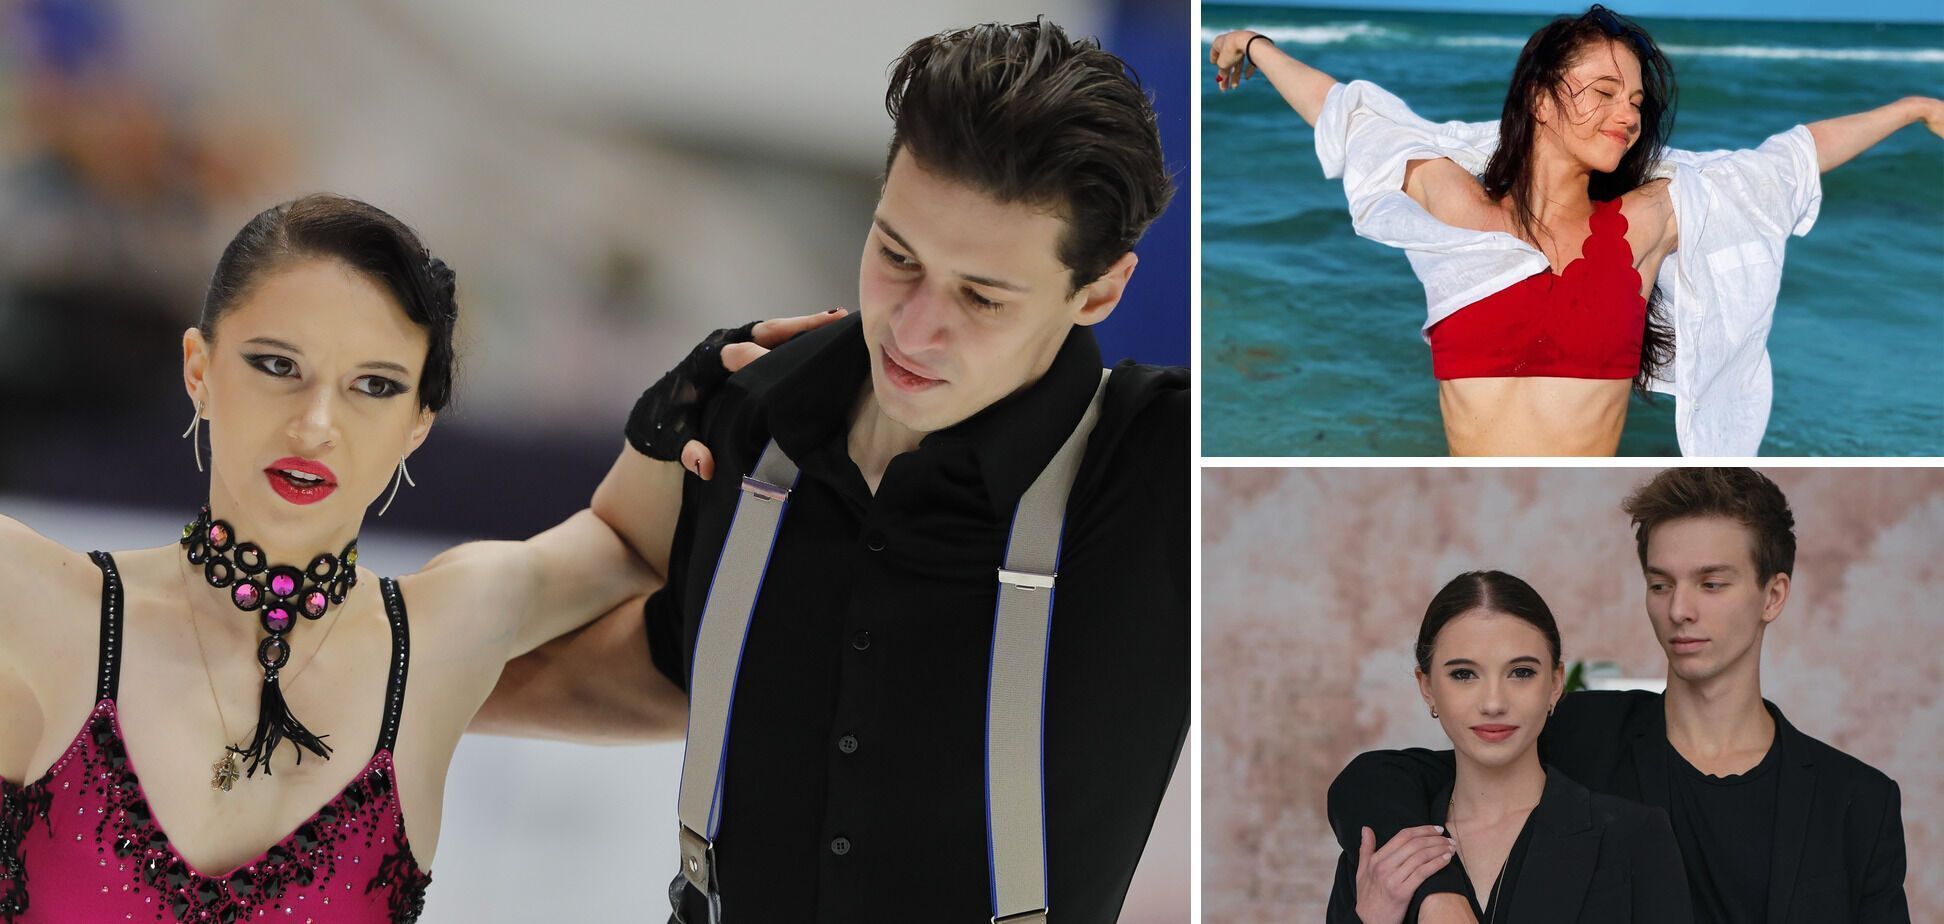 Karma catches up with 4-time Italian figure skating champion for his love for Russia